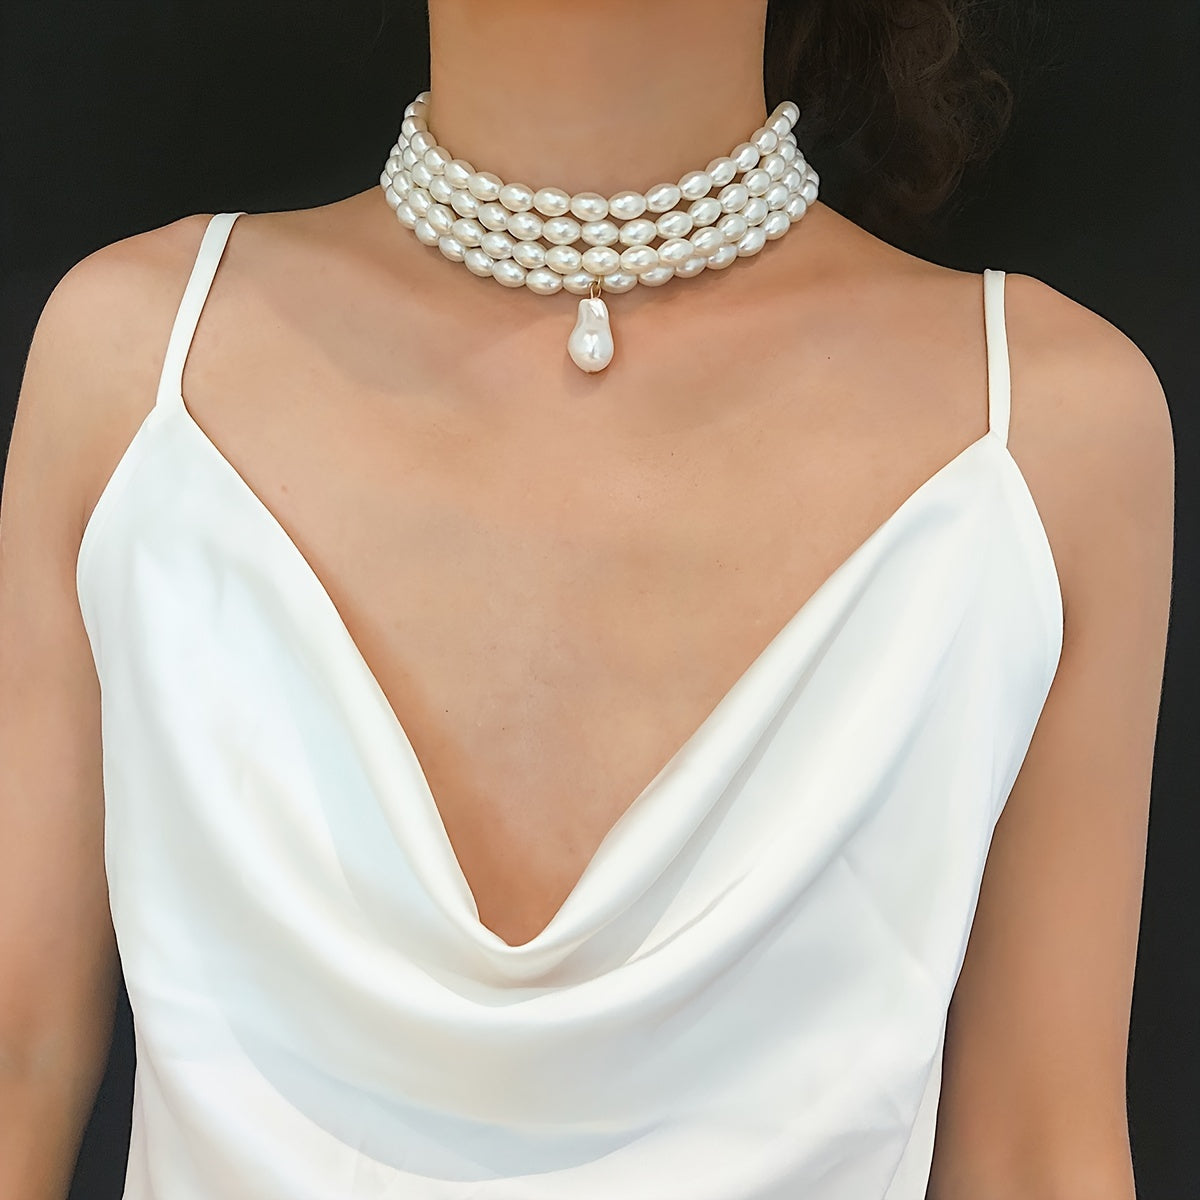 Gorgeous Baroque-Shaped Pearl Necklace - Perfect for Holiday Style!